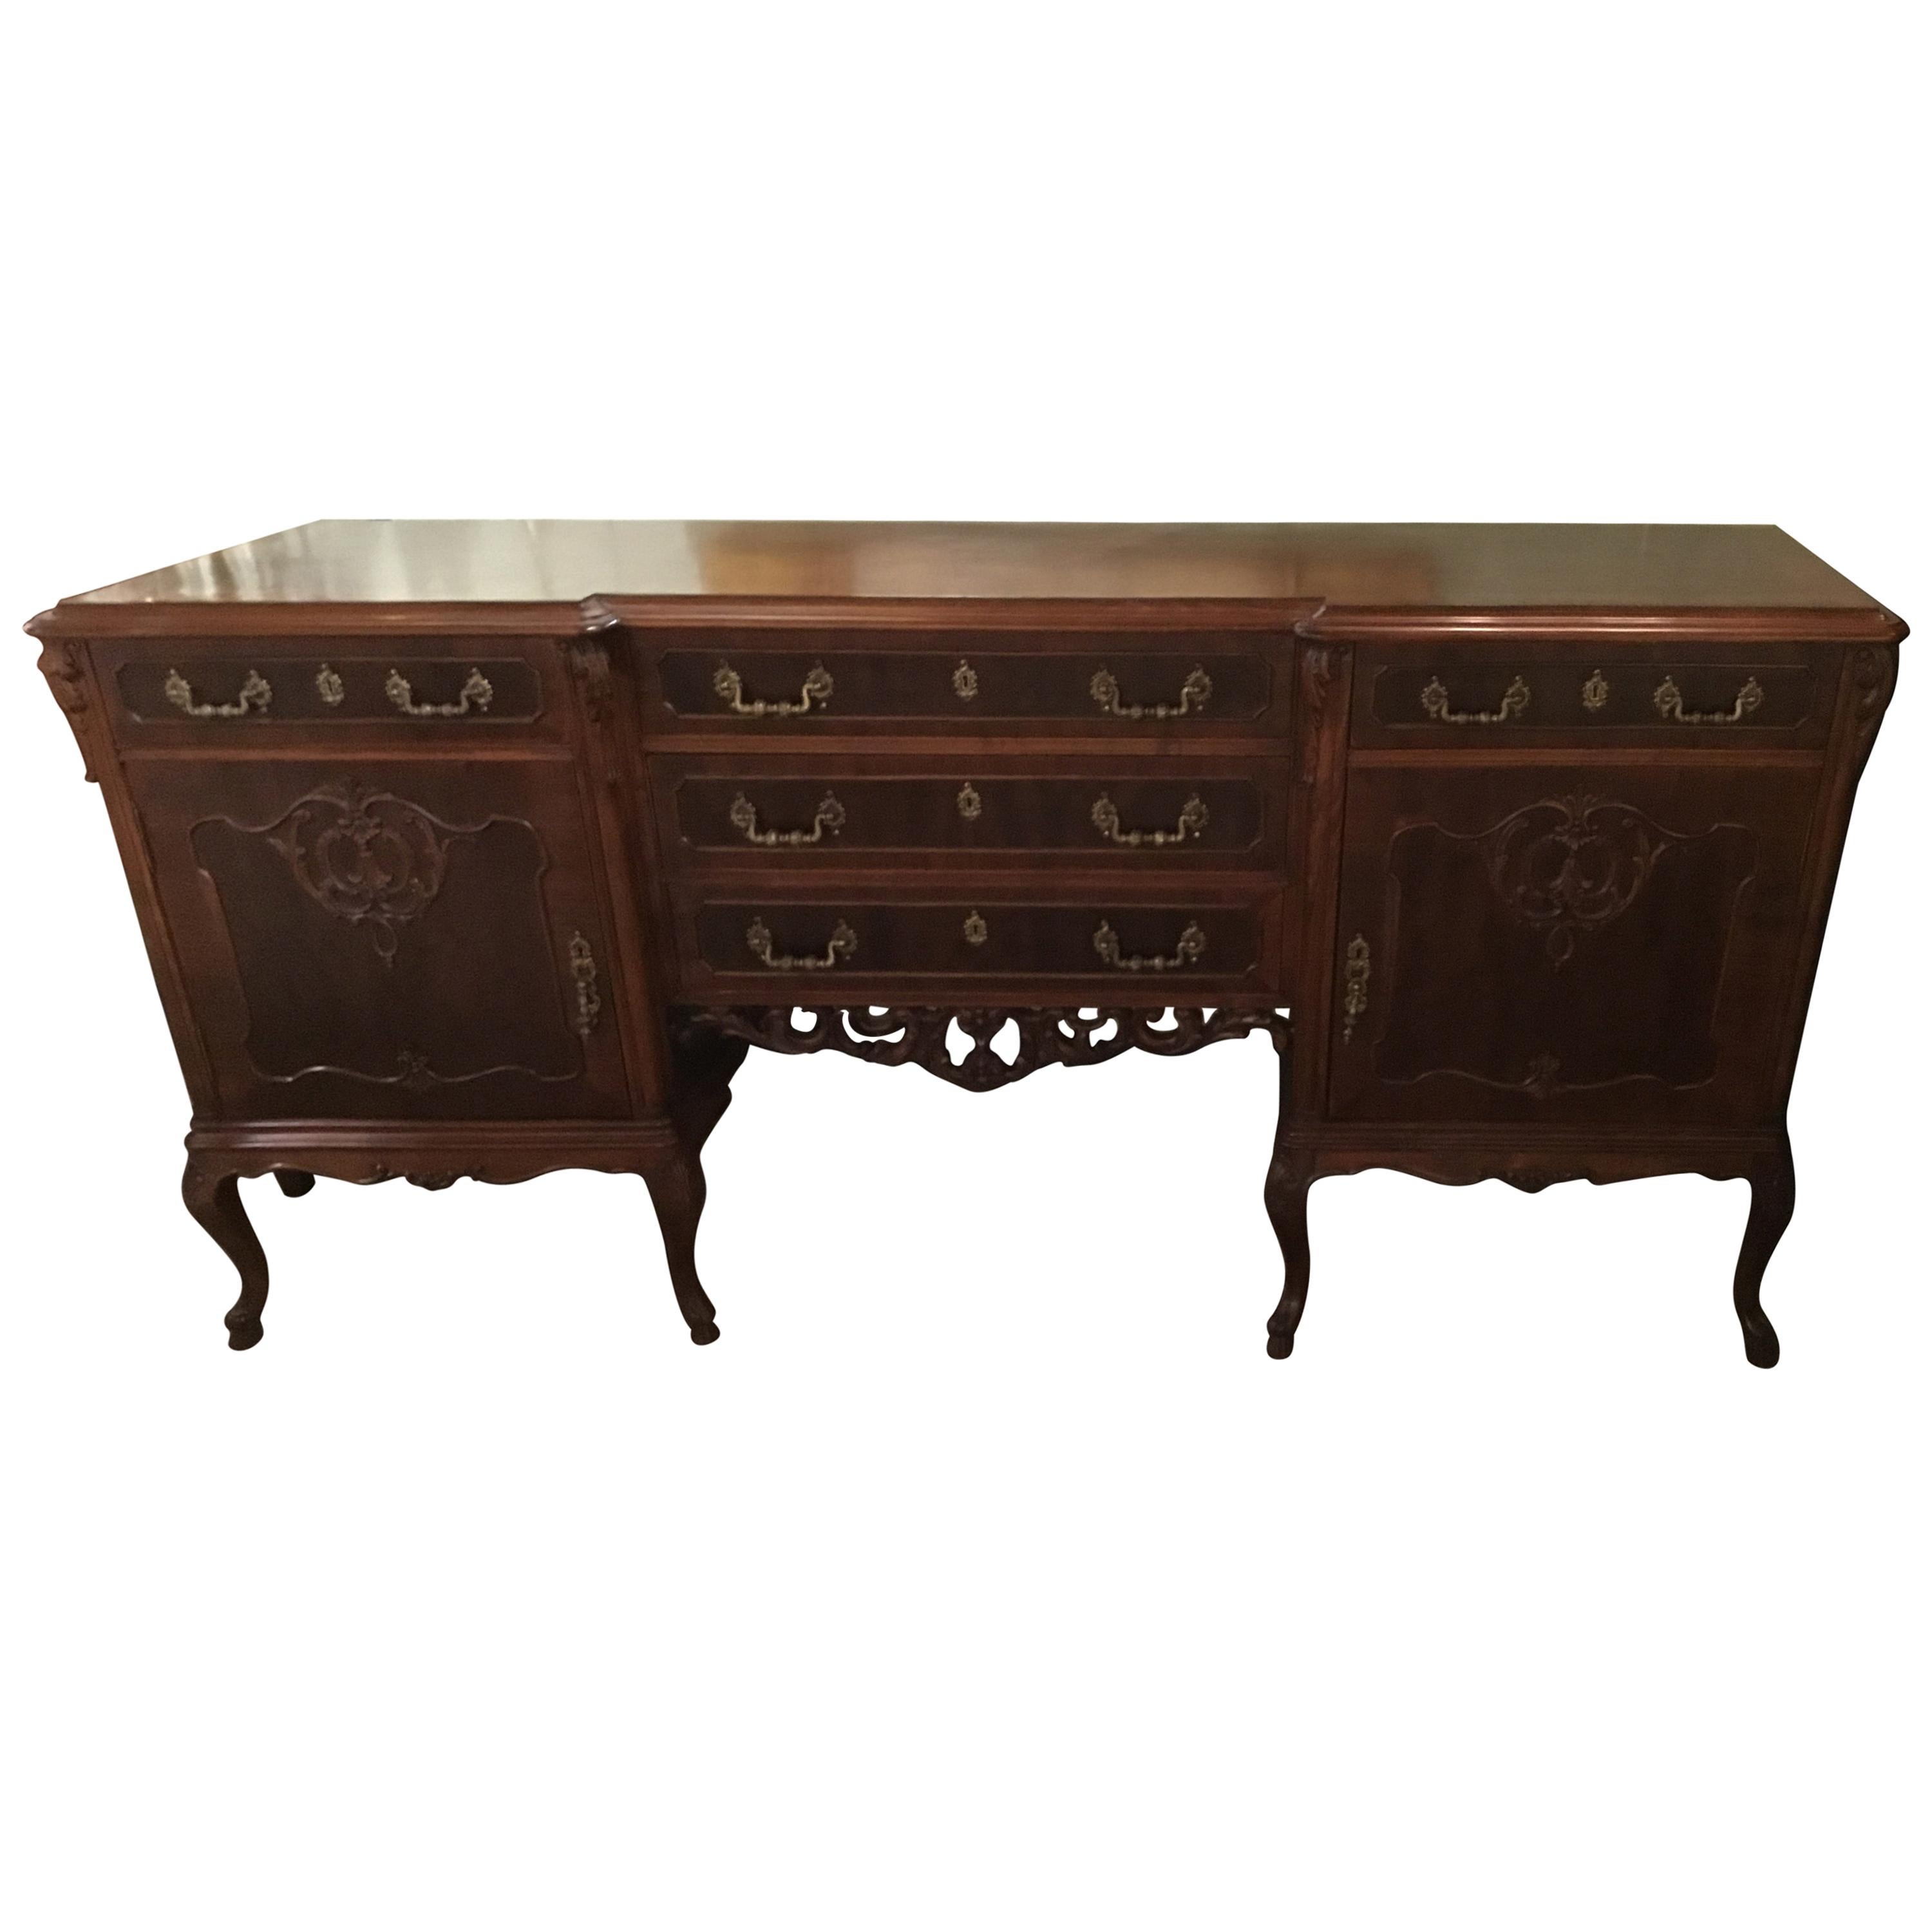 Buffet/Sideboard from Spain, circa 1900